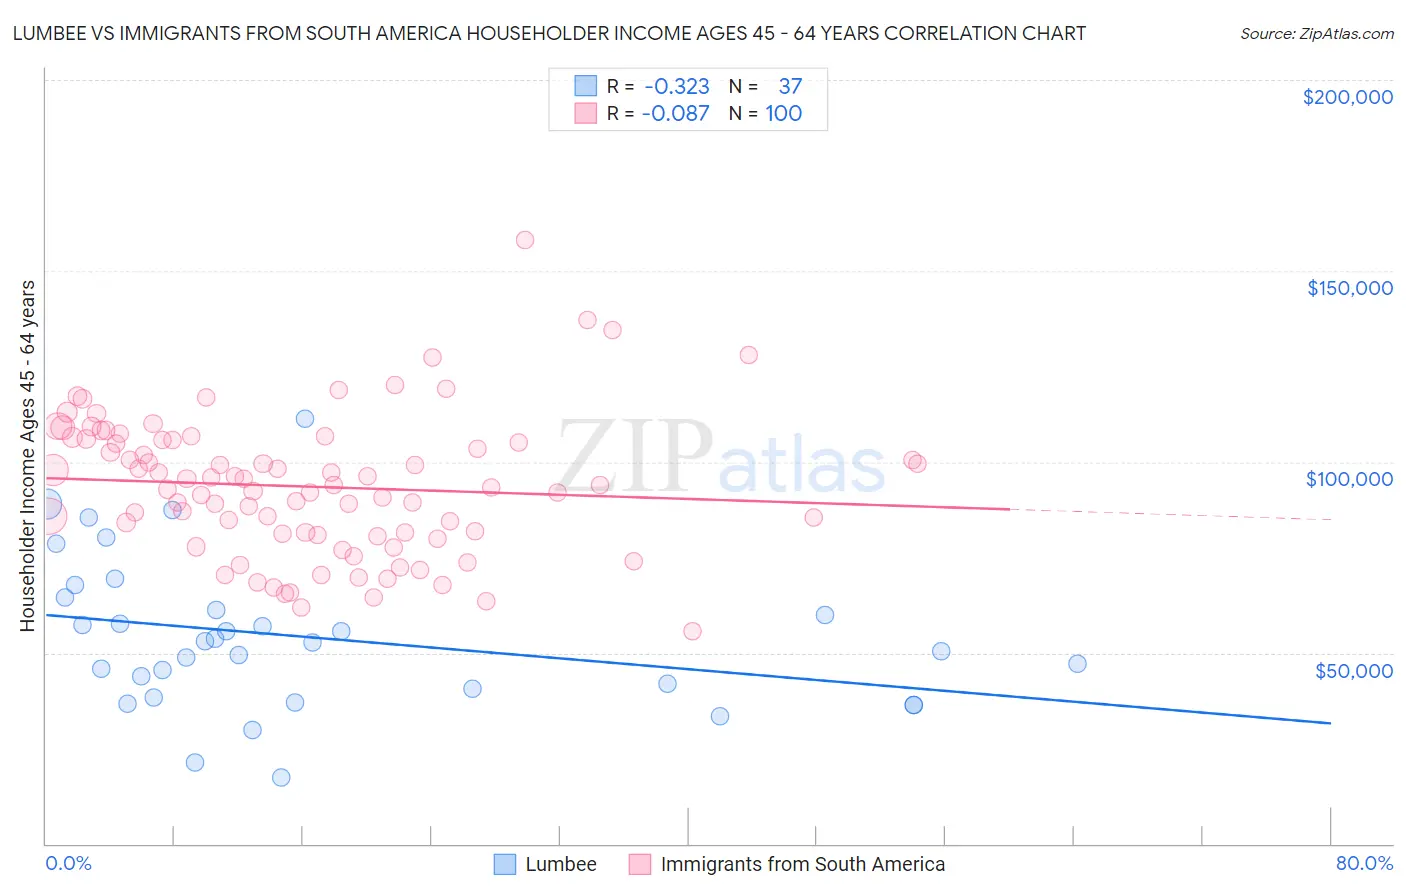 Lumbee vs Immigrants from South America Householder Income Ages 45 - 64 years